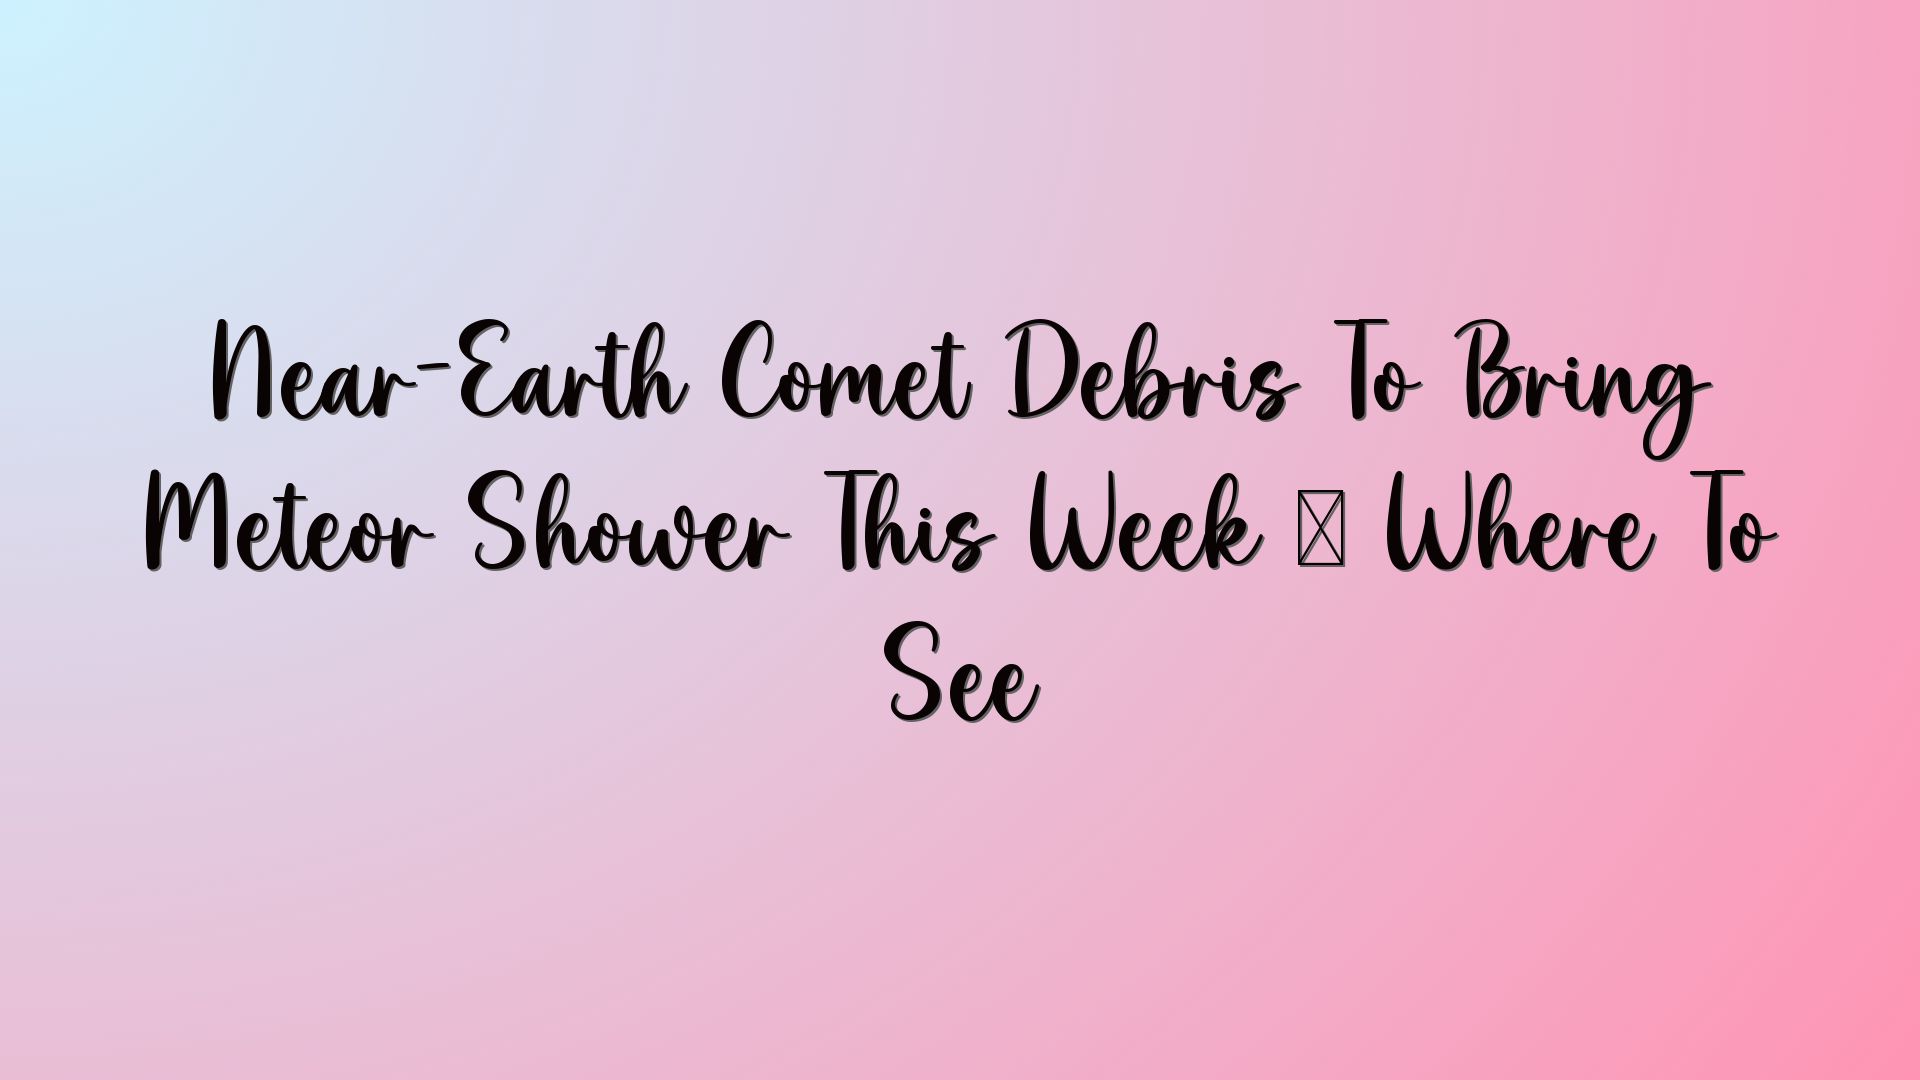 Near-Earth Comet Debris To Bring Meteor Shower This Week — Where To See